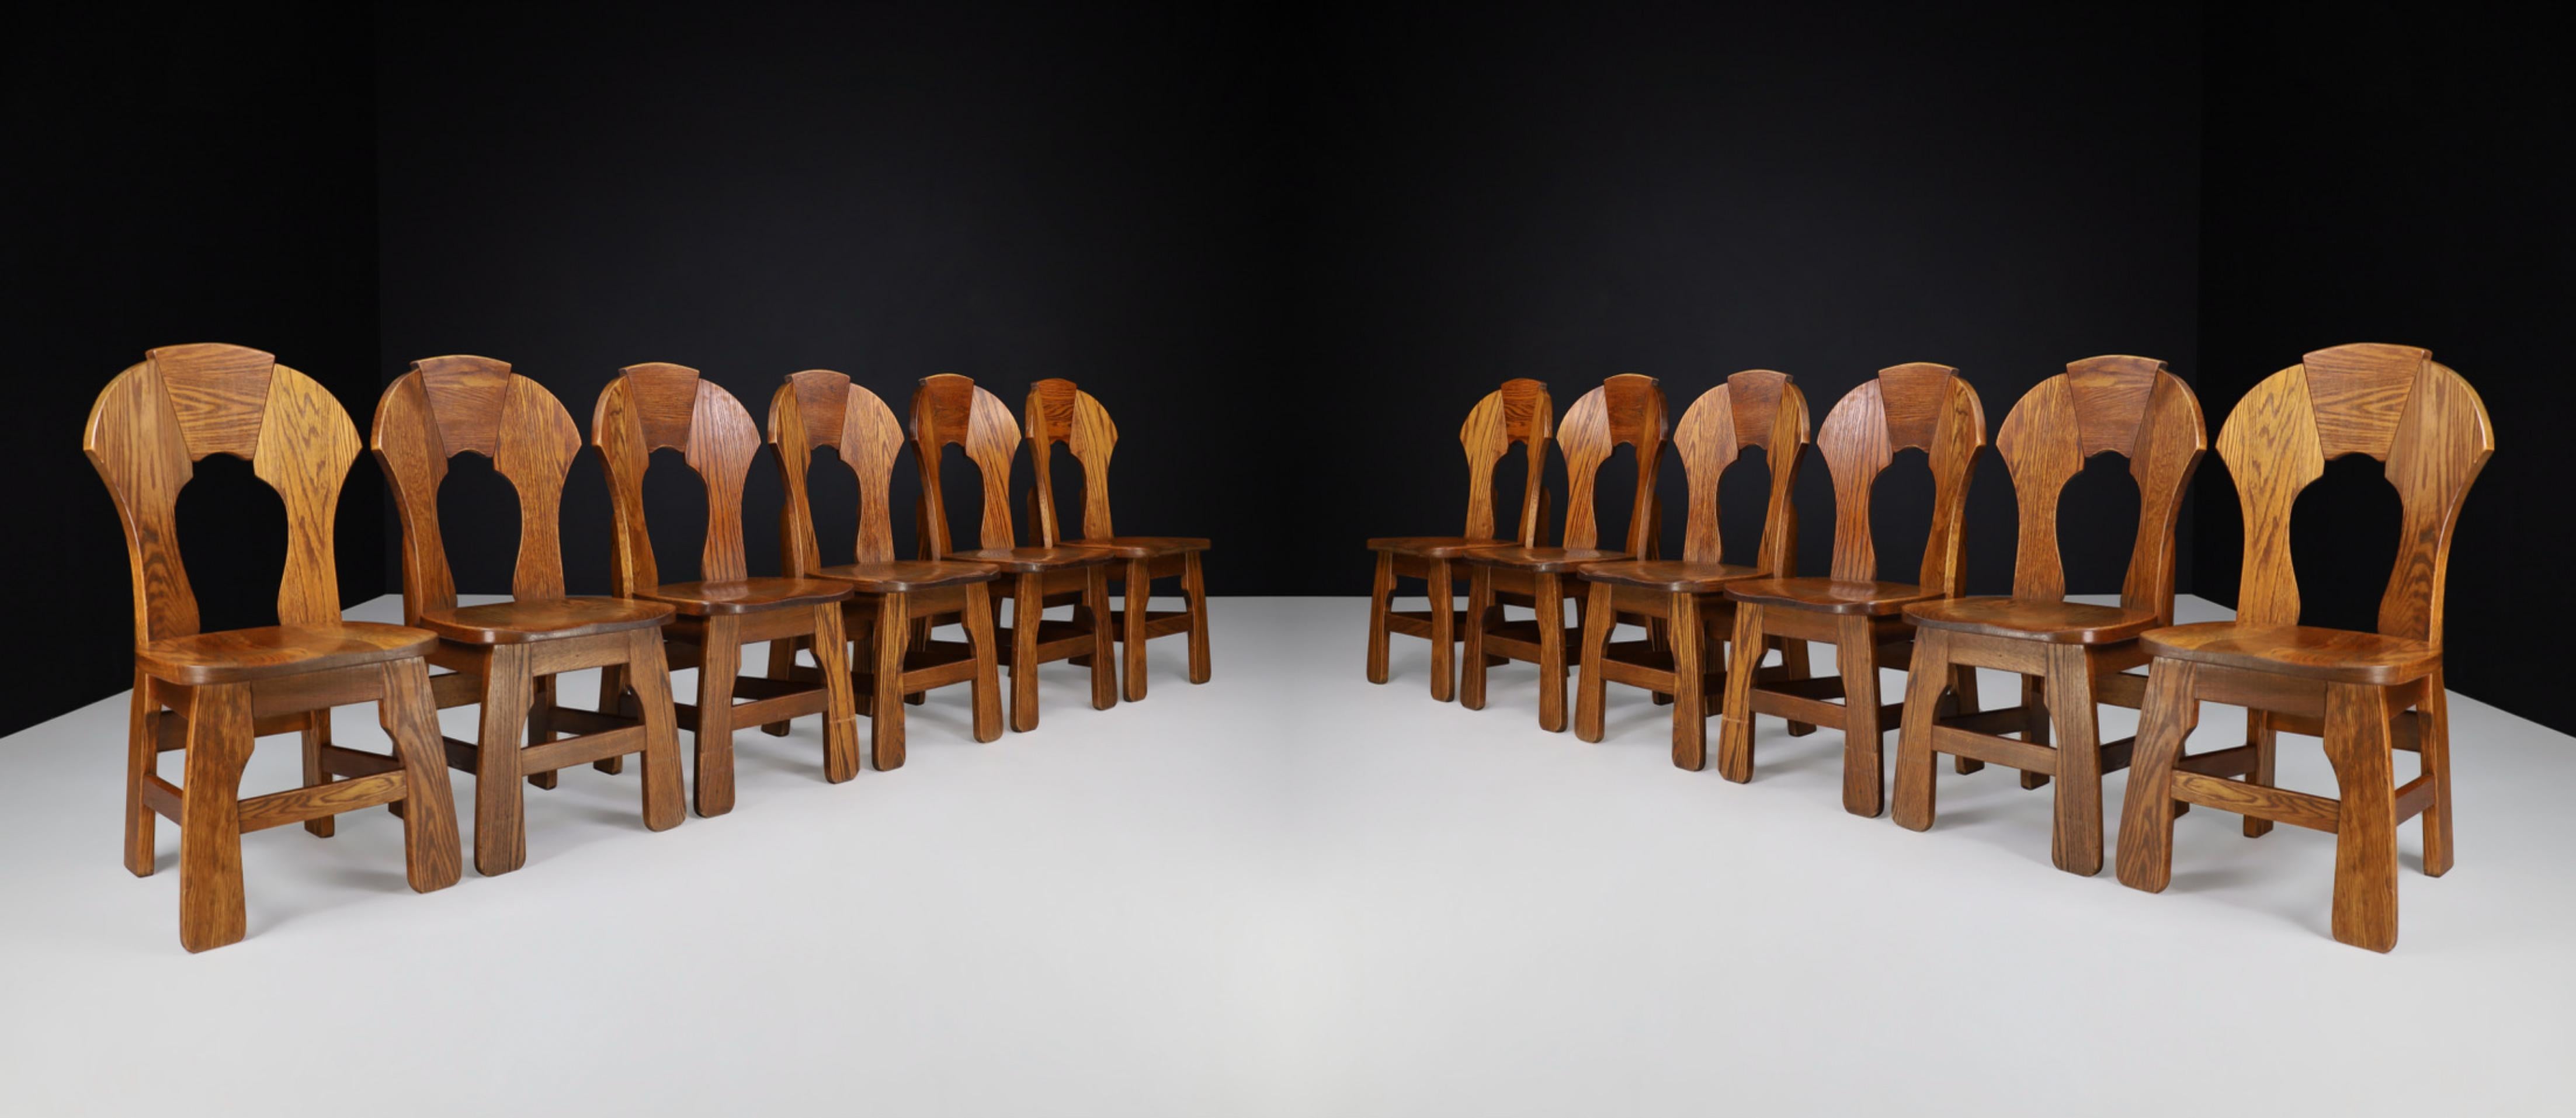 Brutalist Oak dining chairs, France, 1960s 

An extensive set of twelve Oak dining chairs curved in the back, France 1960s. These brutalist chairs are made entirely of solid Oak. They are in excellent original condition. These chairs are not just